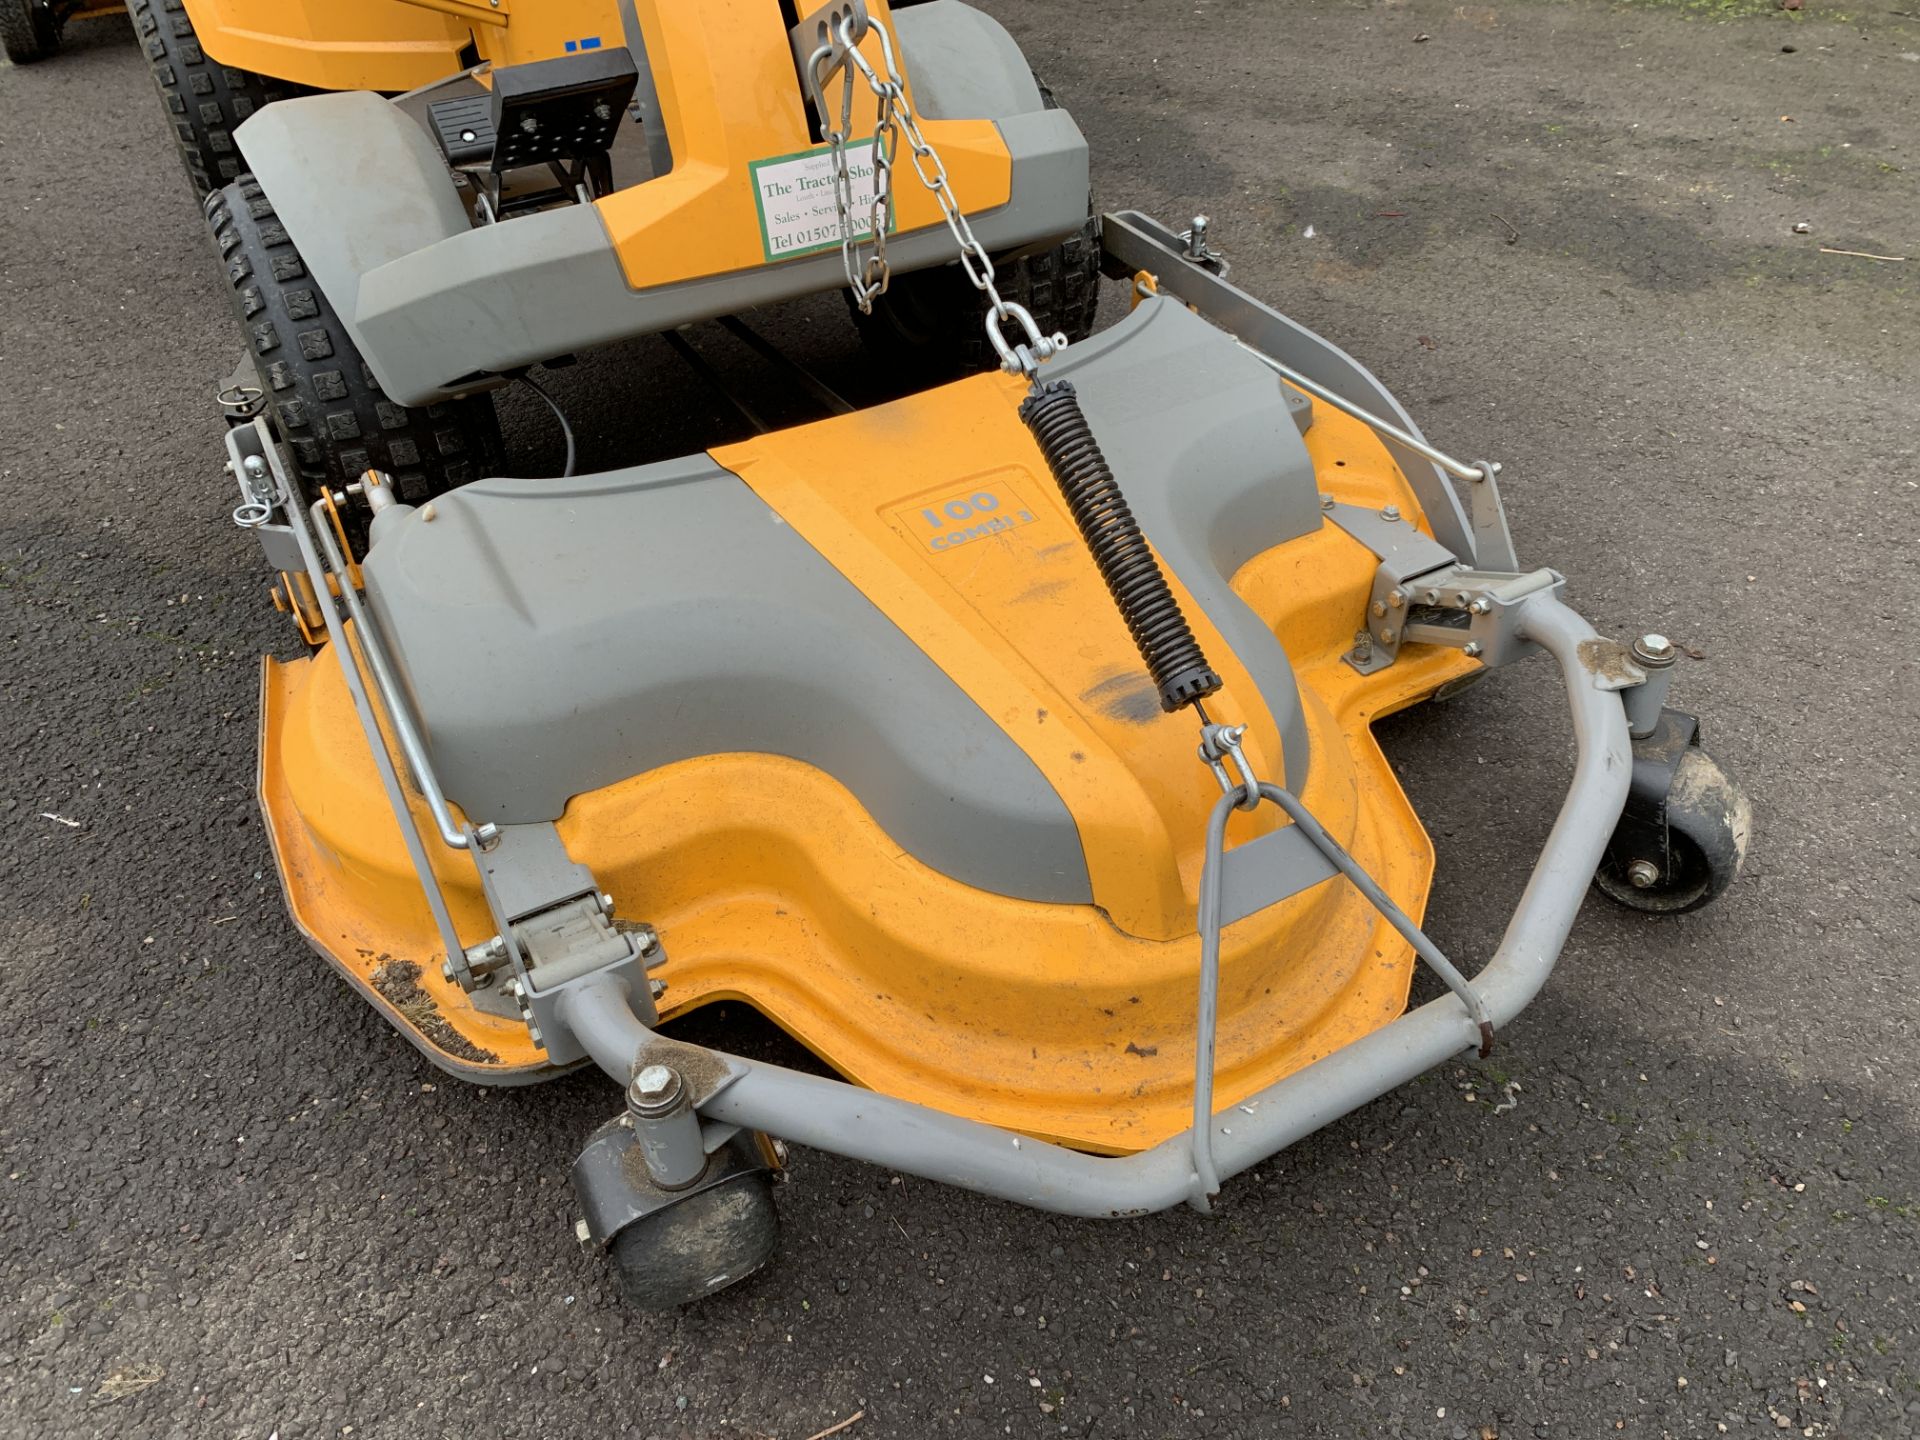 Stiga Combi Park Plus Ride-On Mower with 100 Combi 3 Deck and a 42" Grass & Leaf Collector. - Image 3 of 12